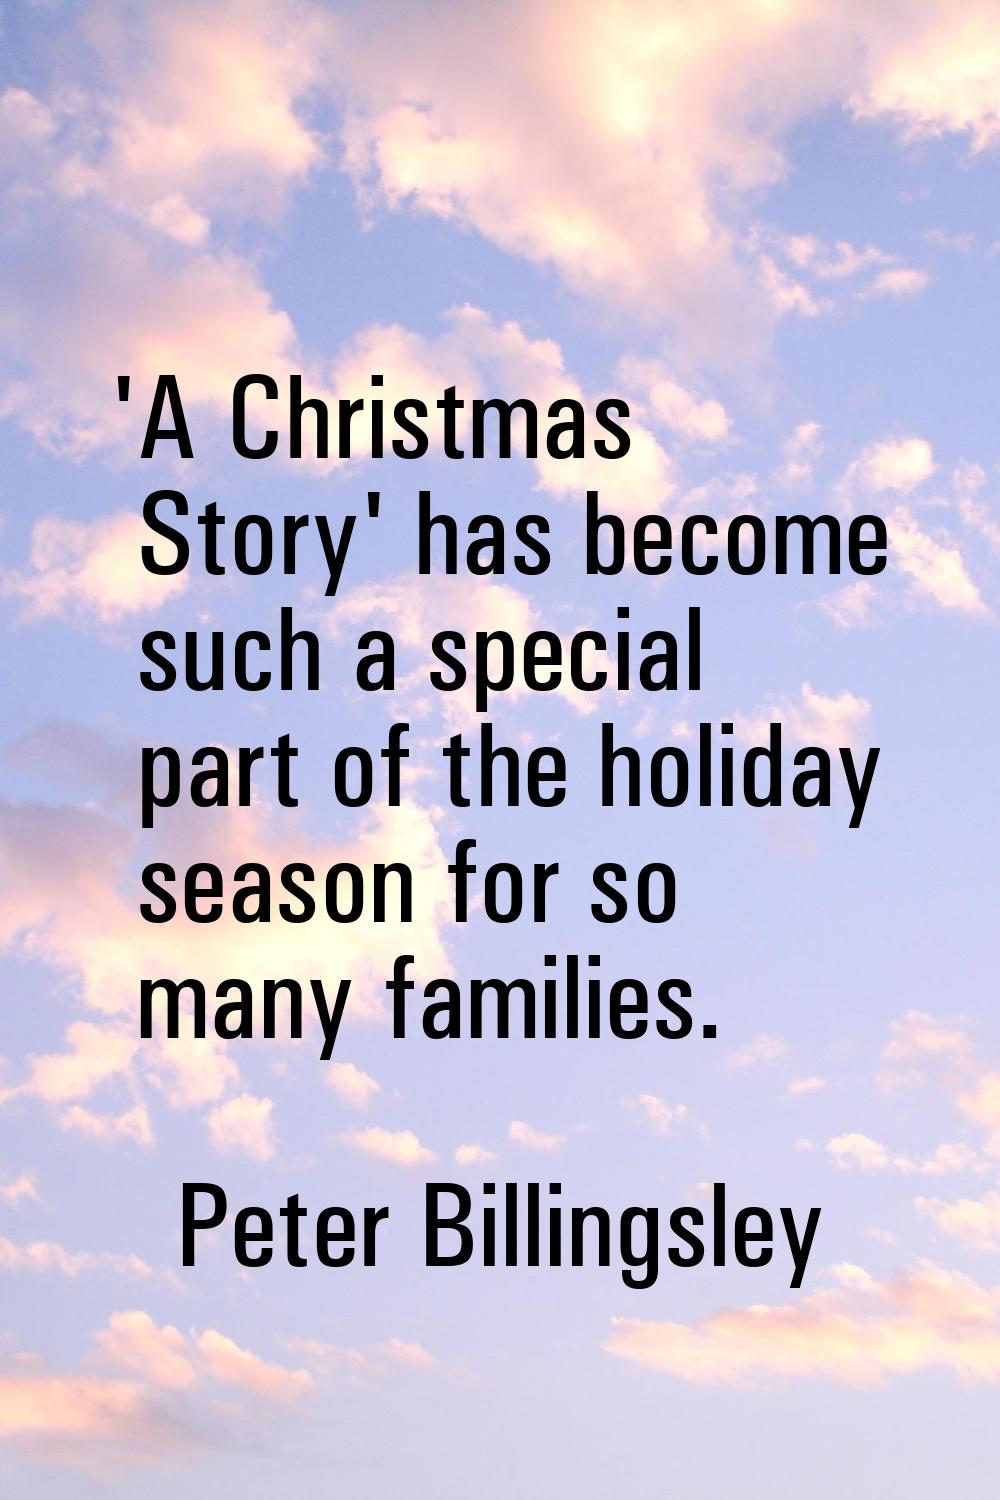 'A Christmas Story' has become such a special part of the holiday season for so many families.